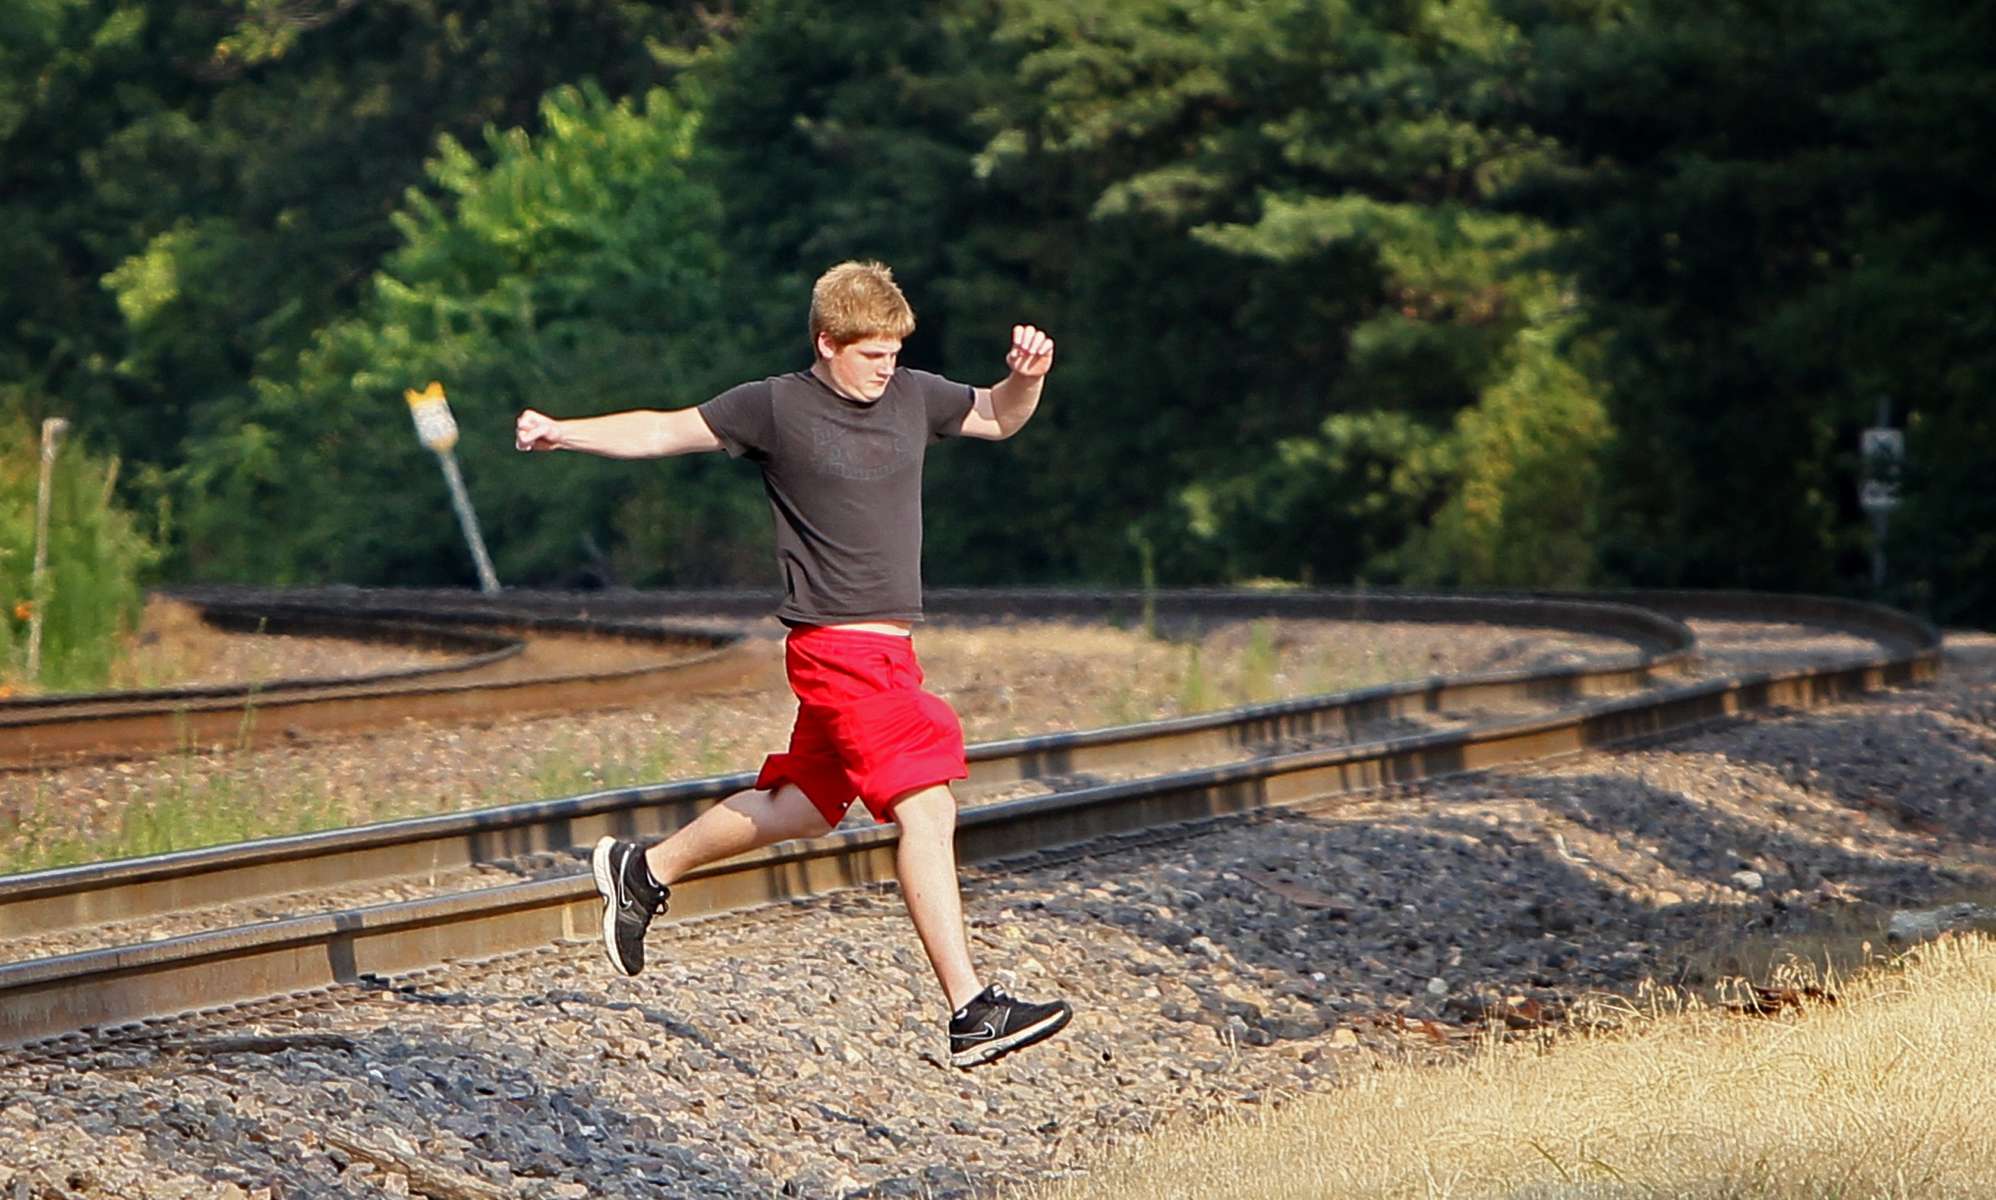 Austin Huster, 16, crosses the train tracks near where Cam Vennard, 14, was killed by a train on his way to a memorial concert, Cam Jam, in Cam's honor on July 12, 2012 in Kirkwood.  Cam, 14, was walking along the tracks east of downtown Kirkwood when he was struck and killed by westbound train in May of 2012.  After crossing the tracks Huster and a friend stopped by a make shift memorial for Cam and then continued walking to the concert.Photo By David Carson, dcarson@post-dispatch.com